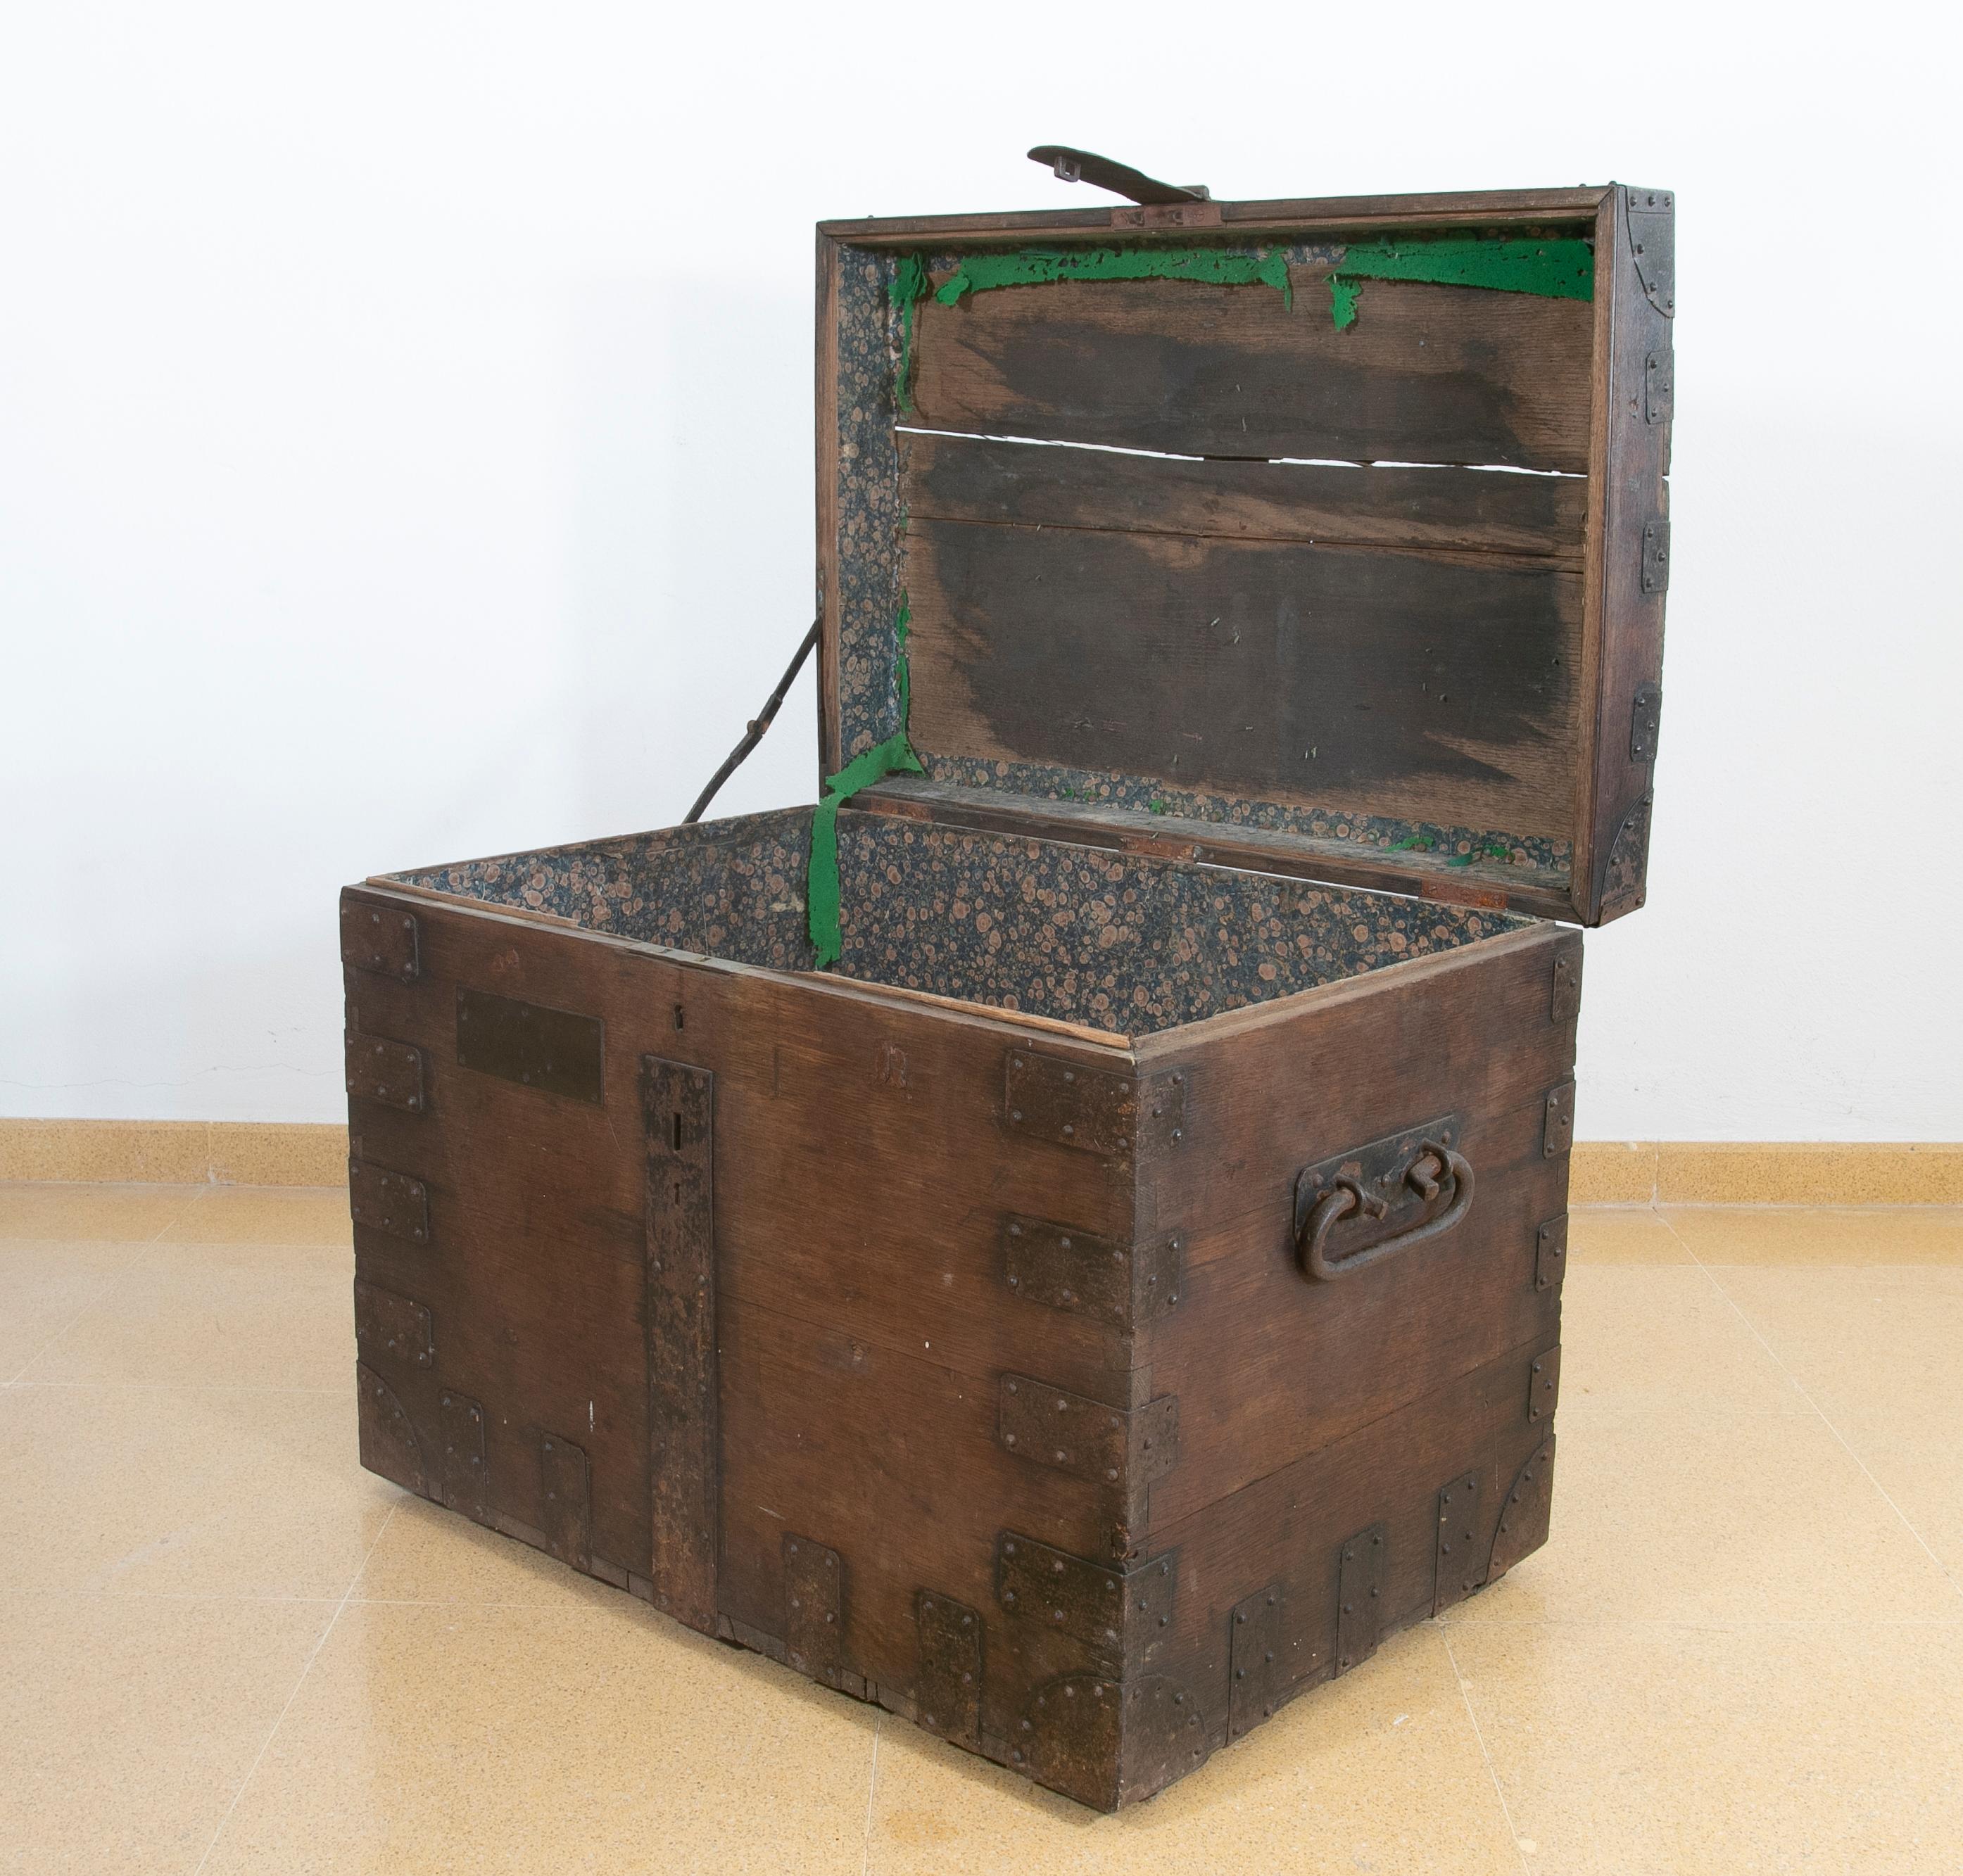 20th Century English Wooden Travelling Case Which Belonged to the Honourable Marquess of Lans For Sale